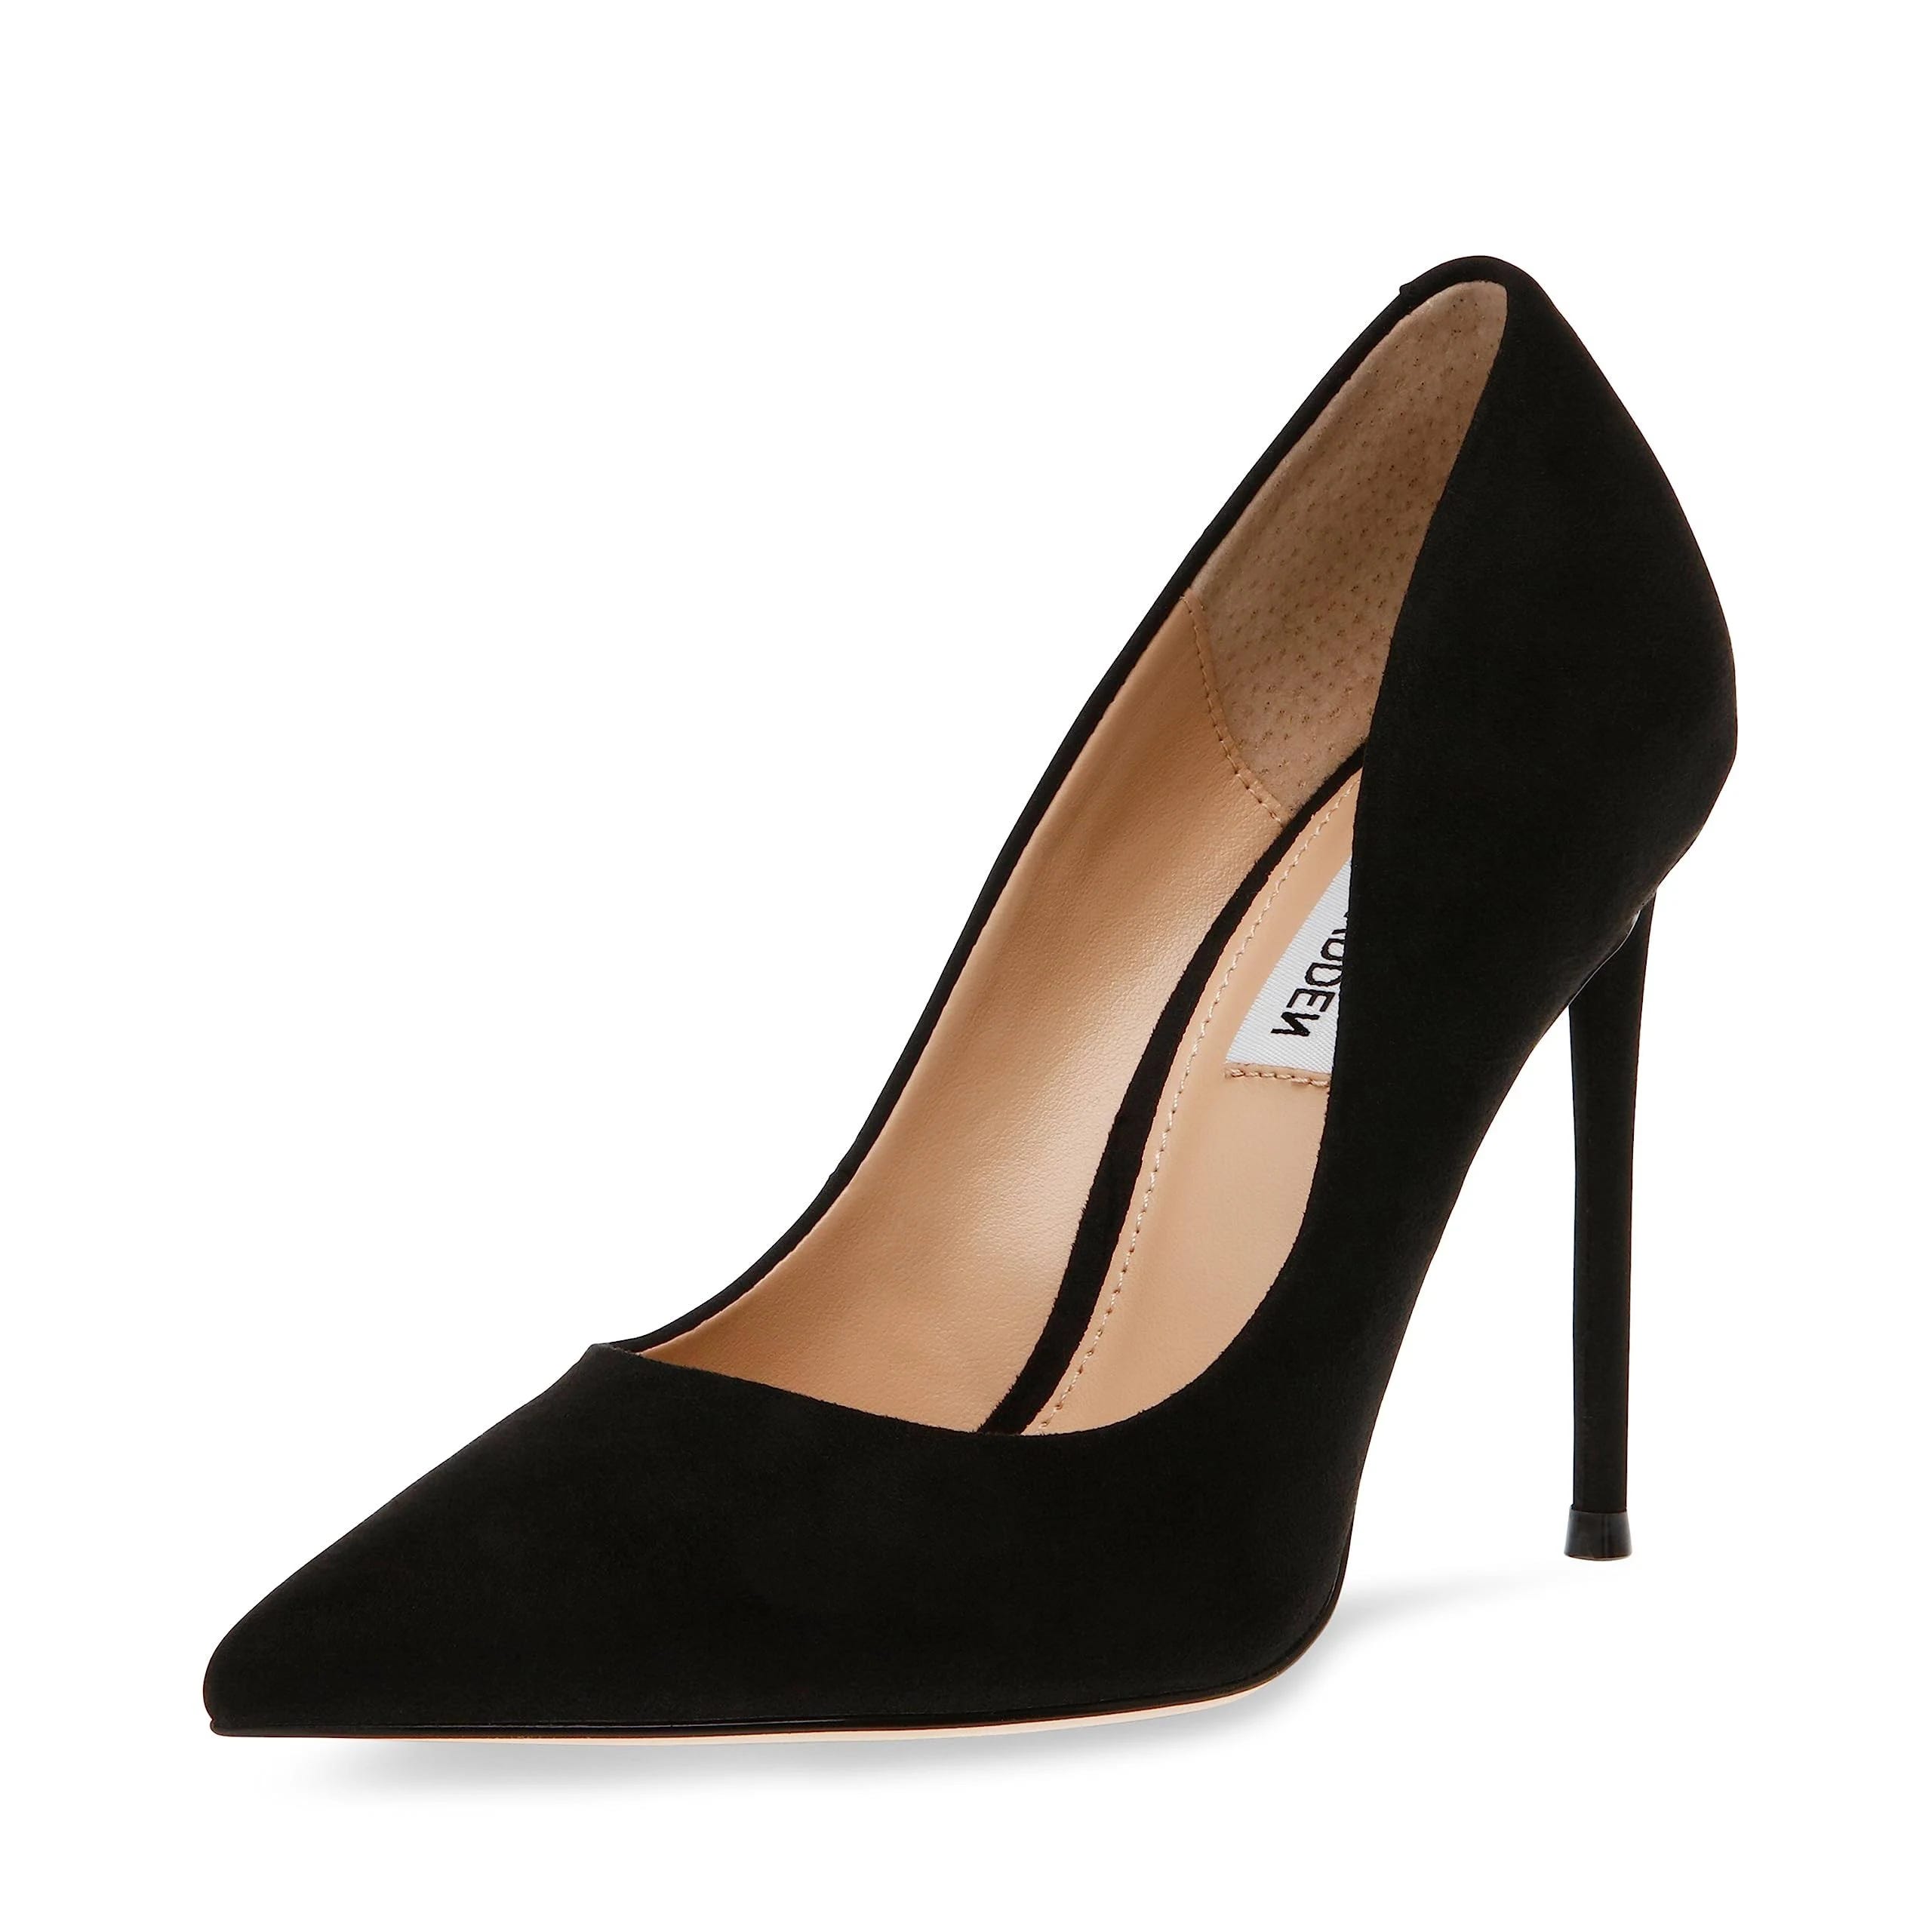 Steve Madden's Black Pointed Toe Stiletto Pumps - Elevated Fashion | Image